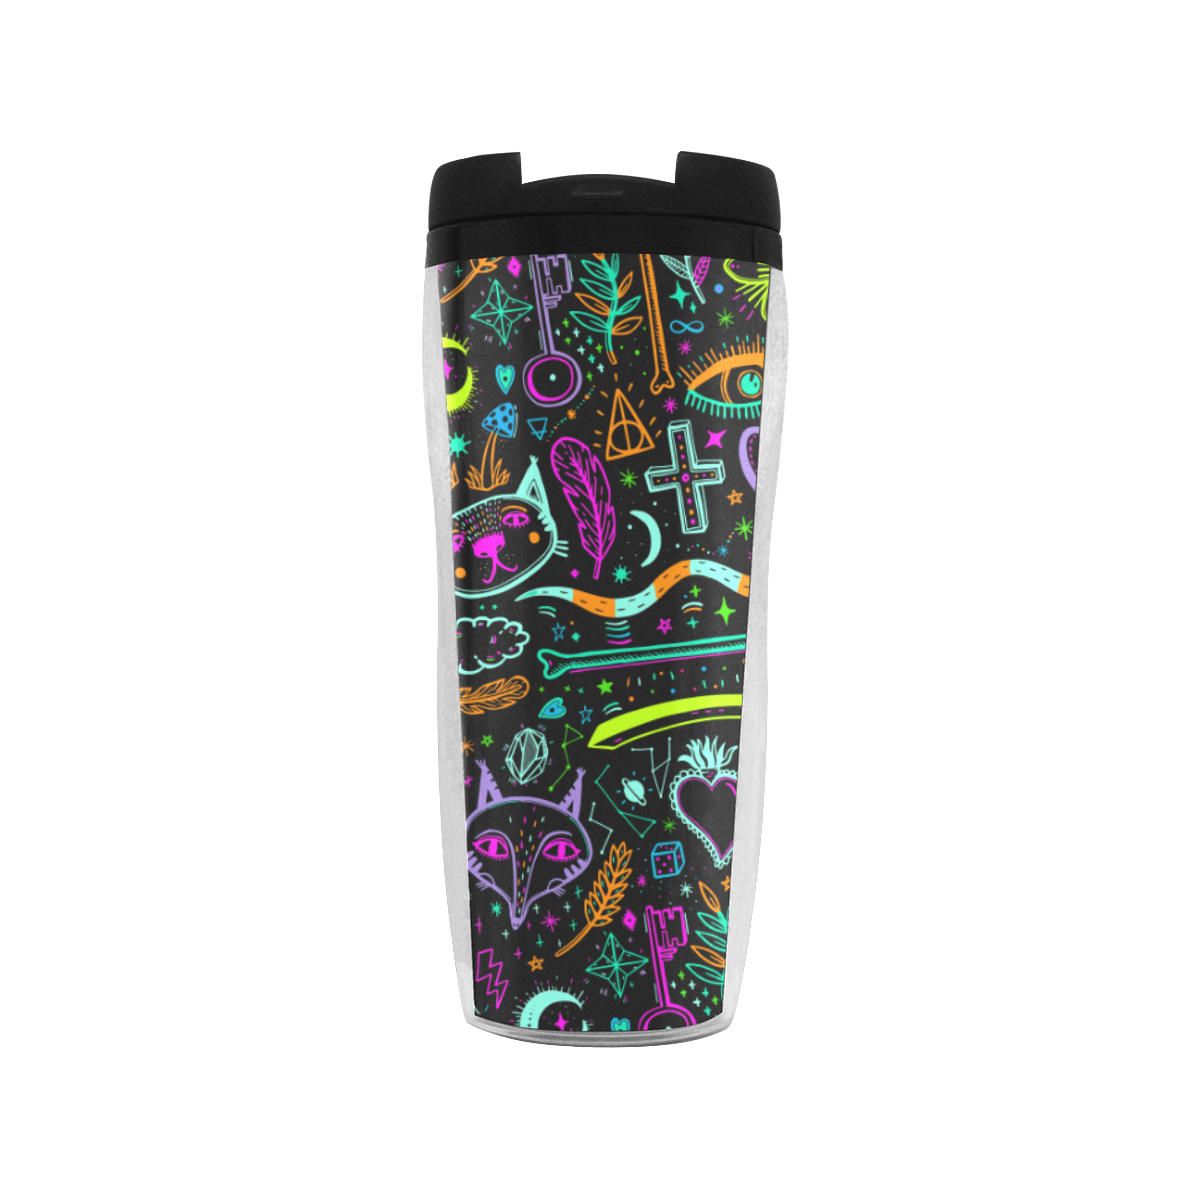 Funny Nature Of Life Sketchnotes Pattern 3 Reusable Coffee Cup (11.8oz)